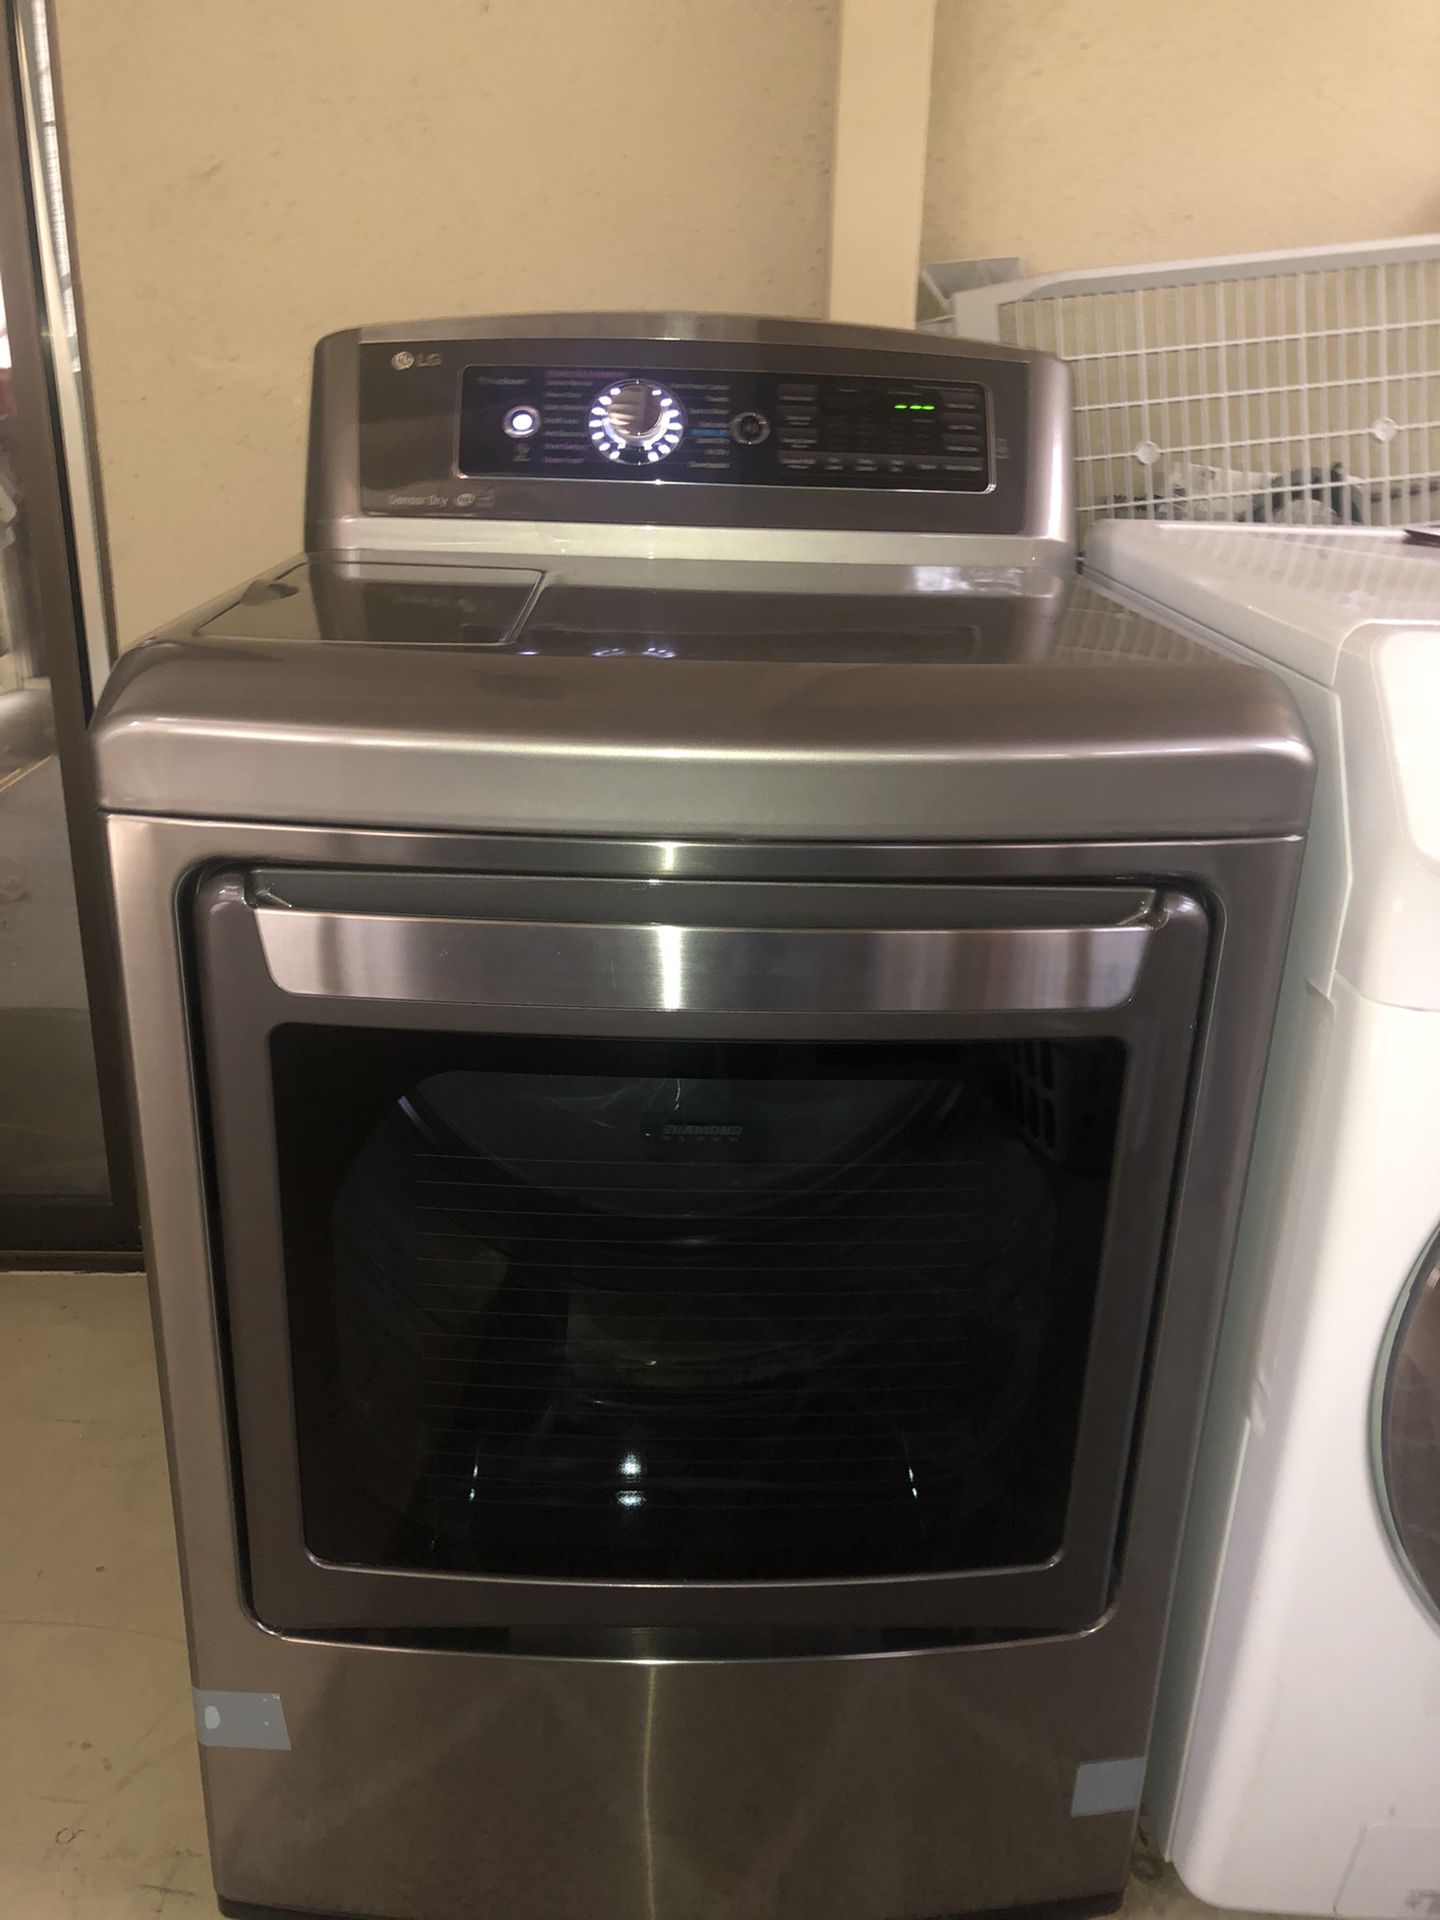 LG and Samsung washer and dryer like new.